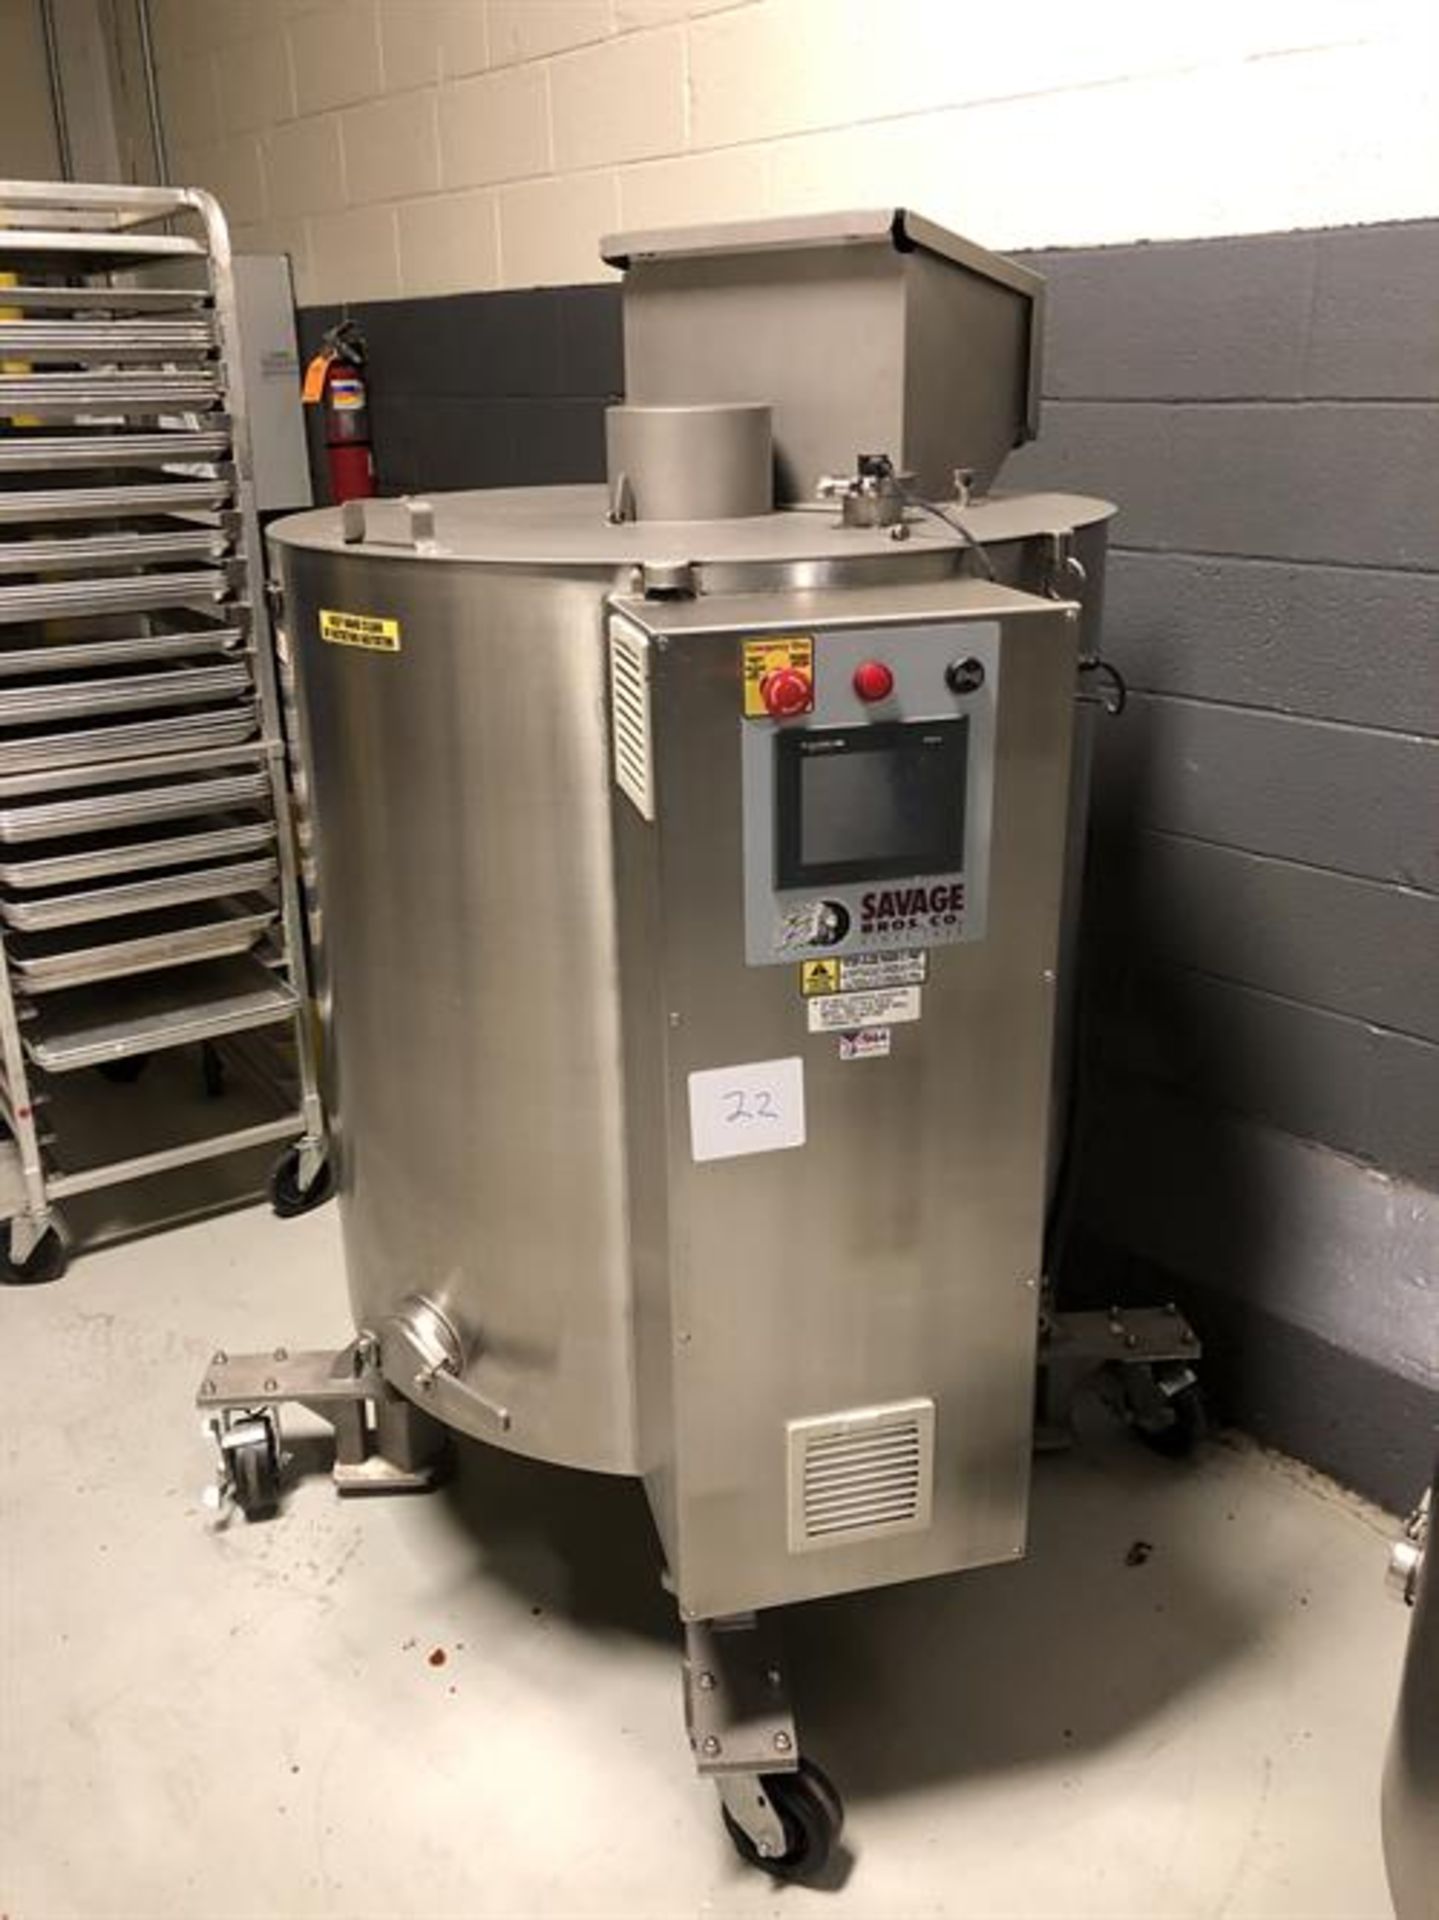 Savage 1250-lb Stainless Steel Choclate Melter - model 0974-46-500, with PLC touchscreen